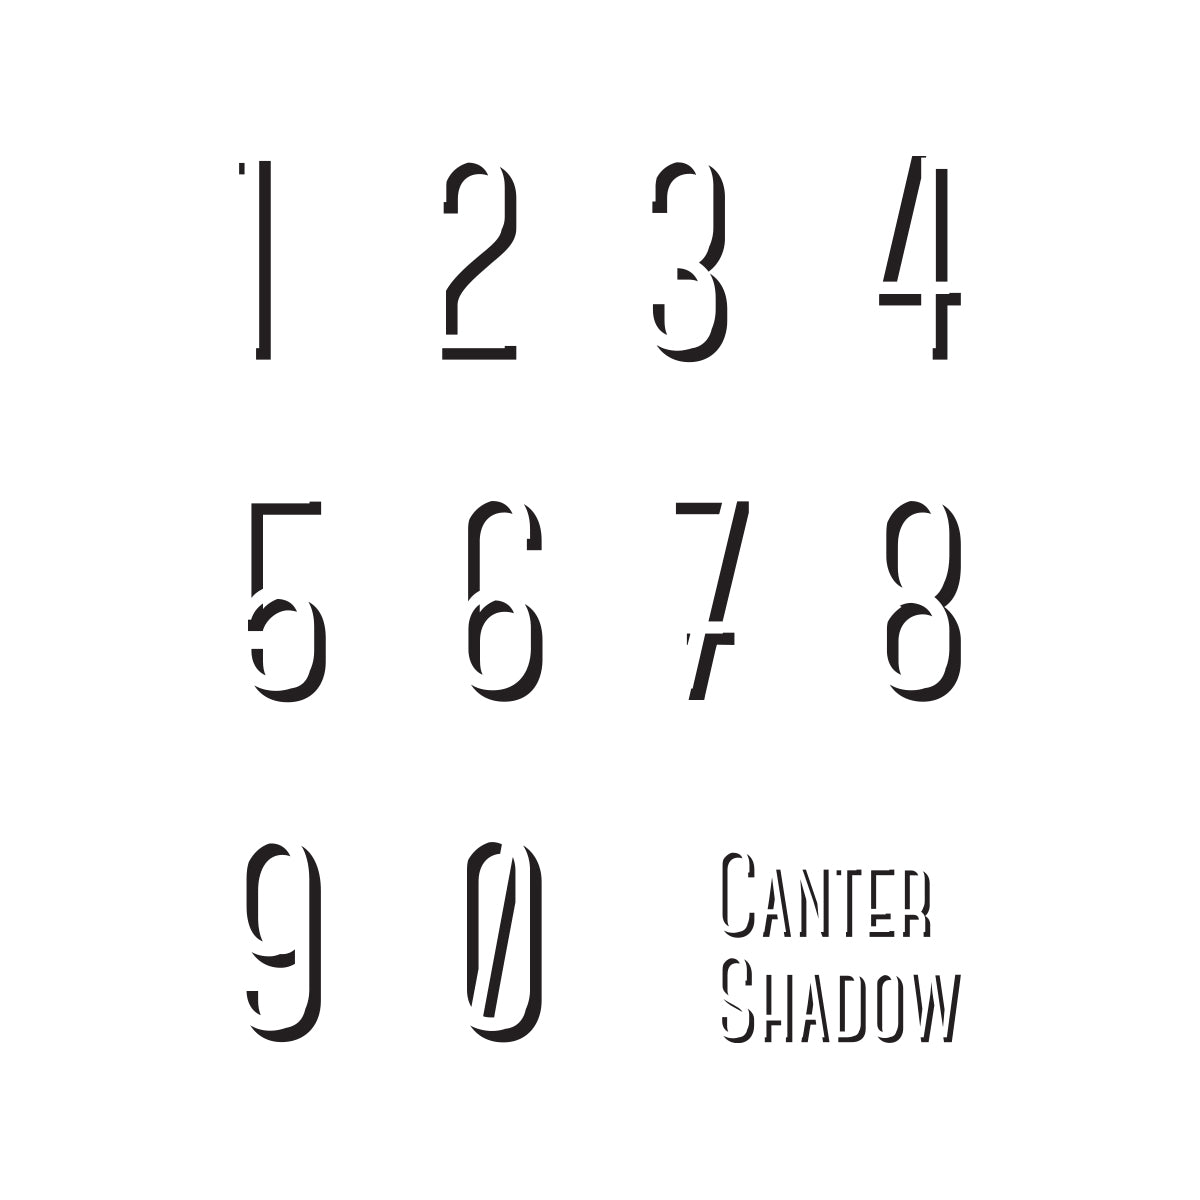 Number-Canter Shadow.